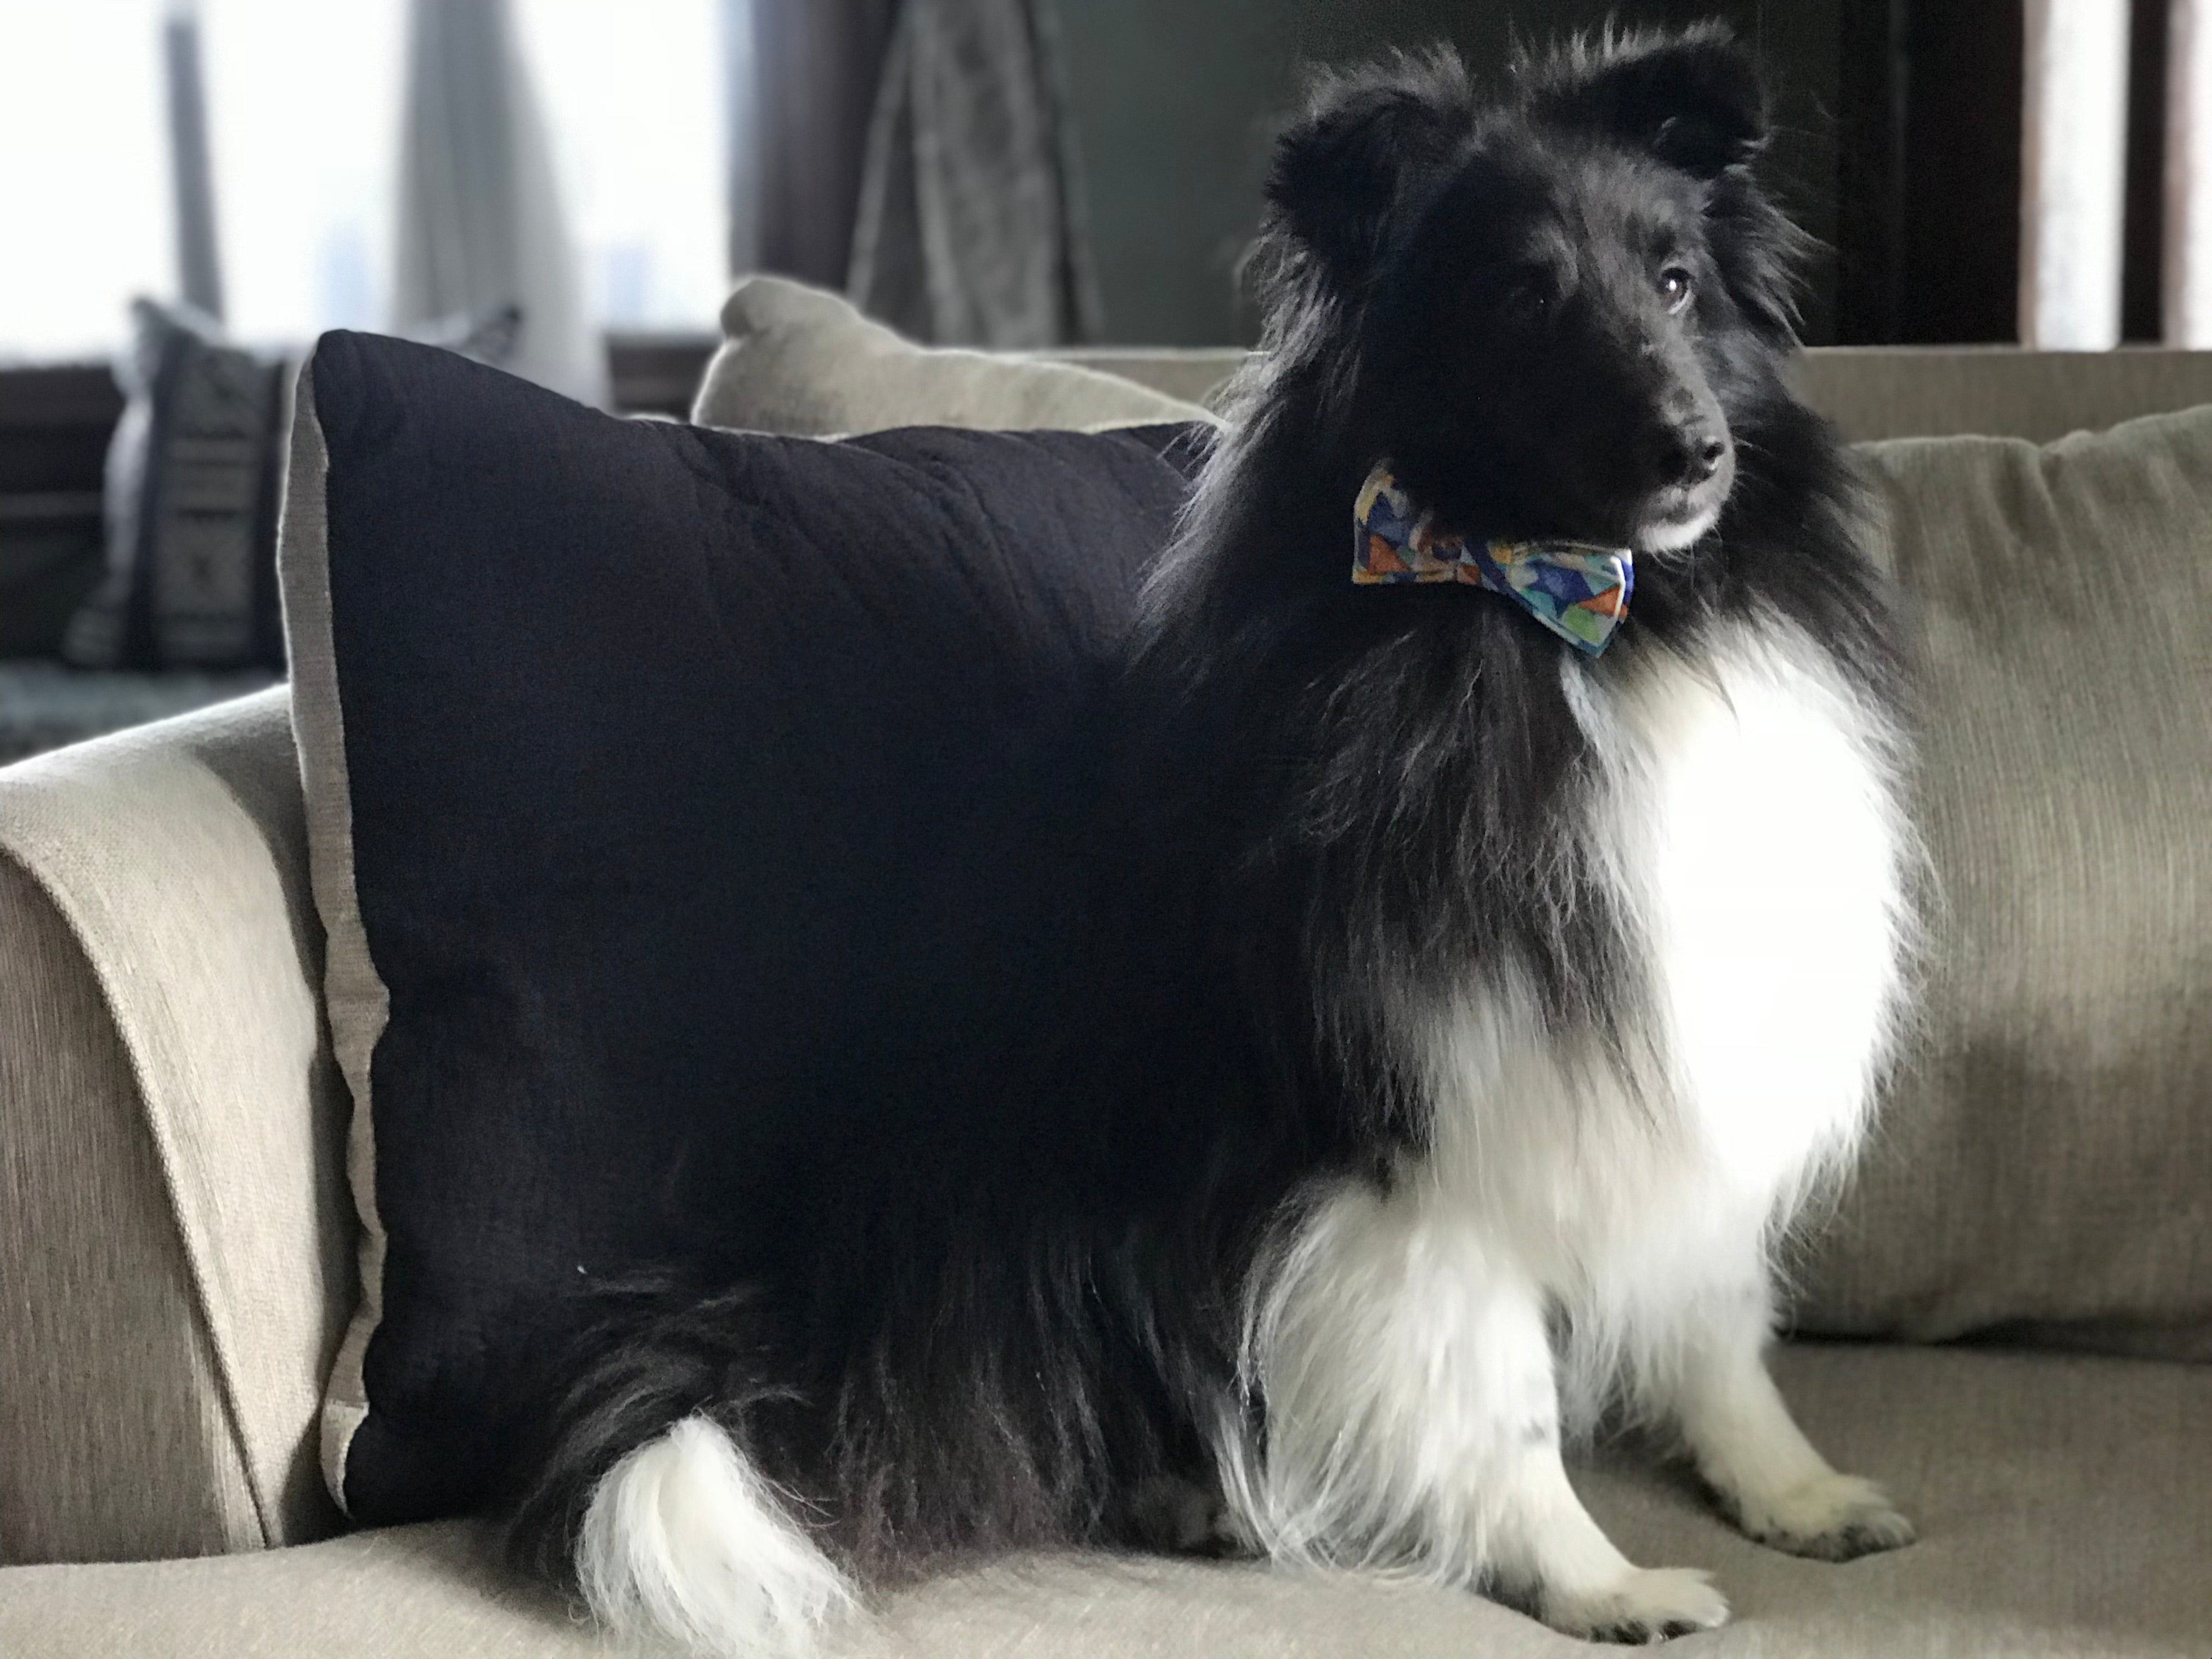 Quilted Inspired Men’s Adjustable Bow Tie with Coordinating Dog Bow Tie